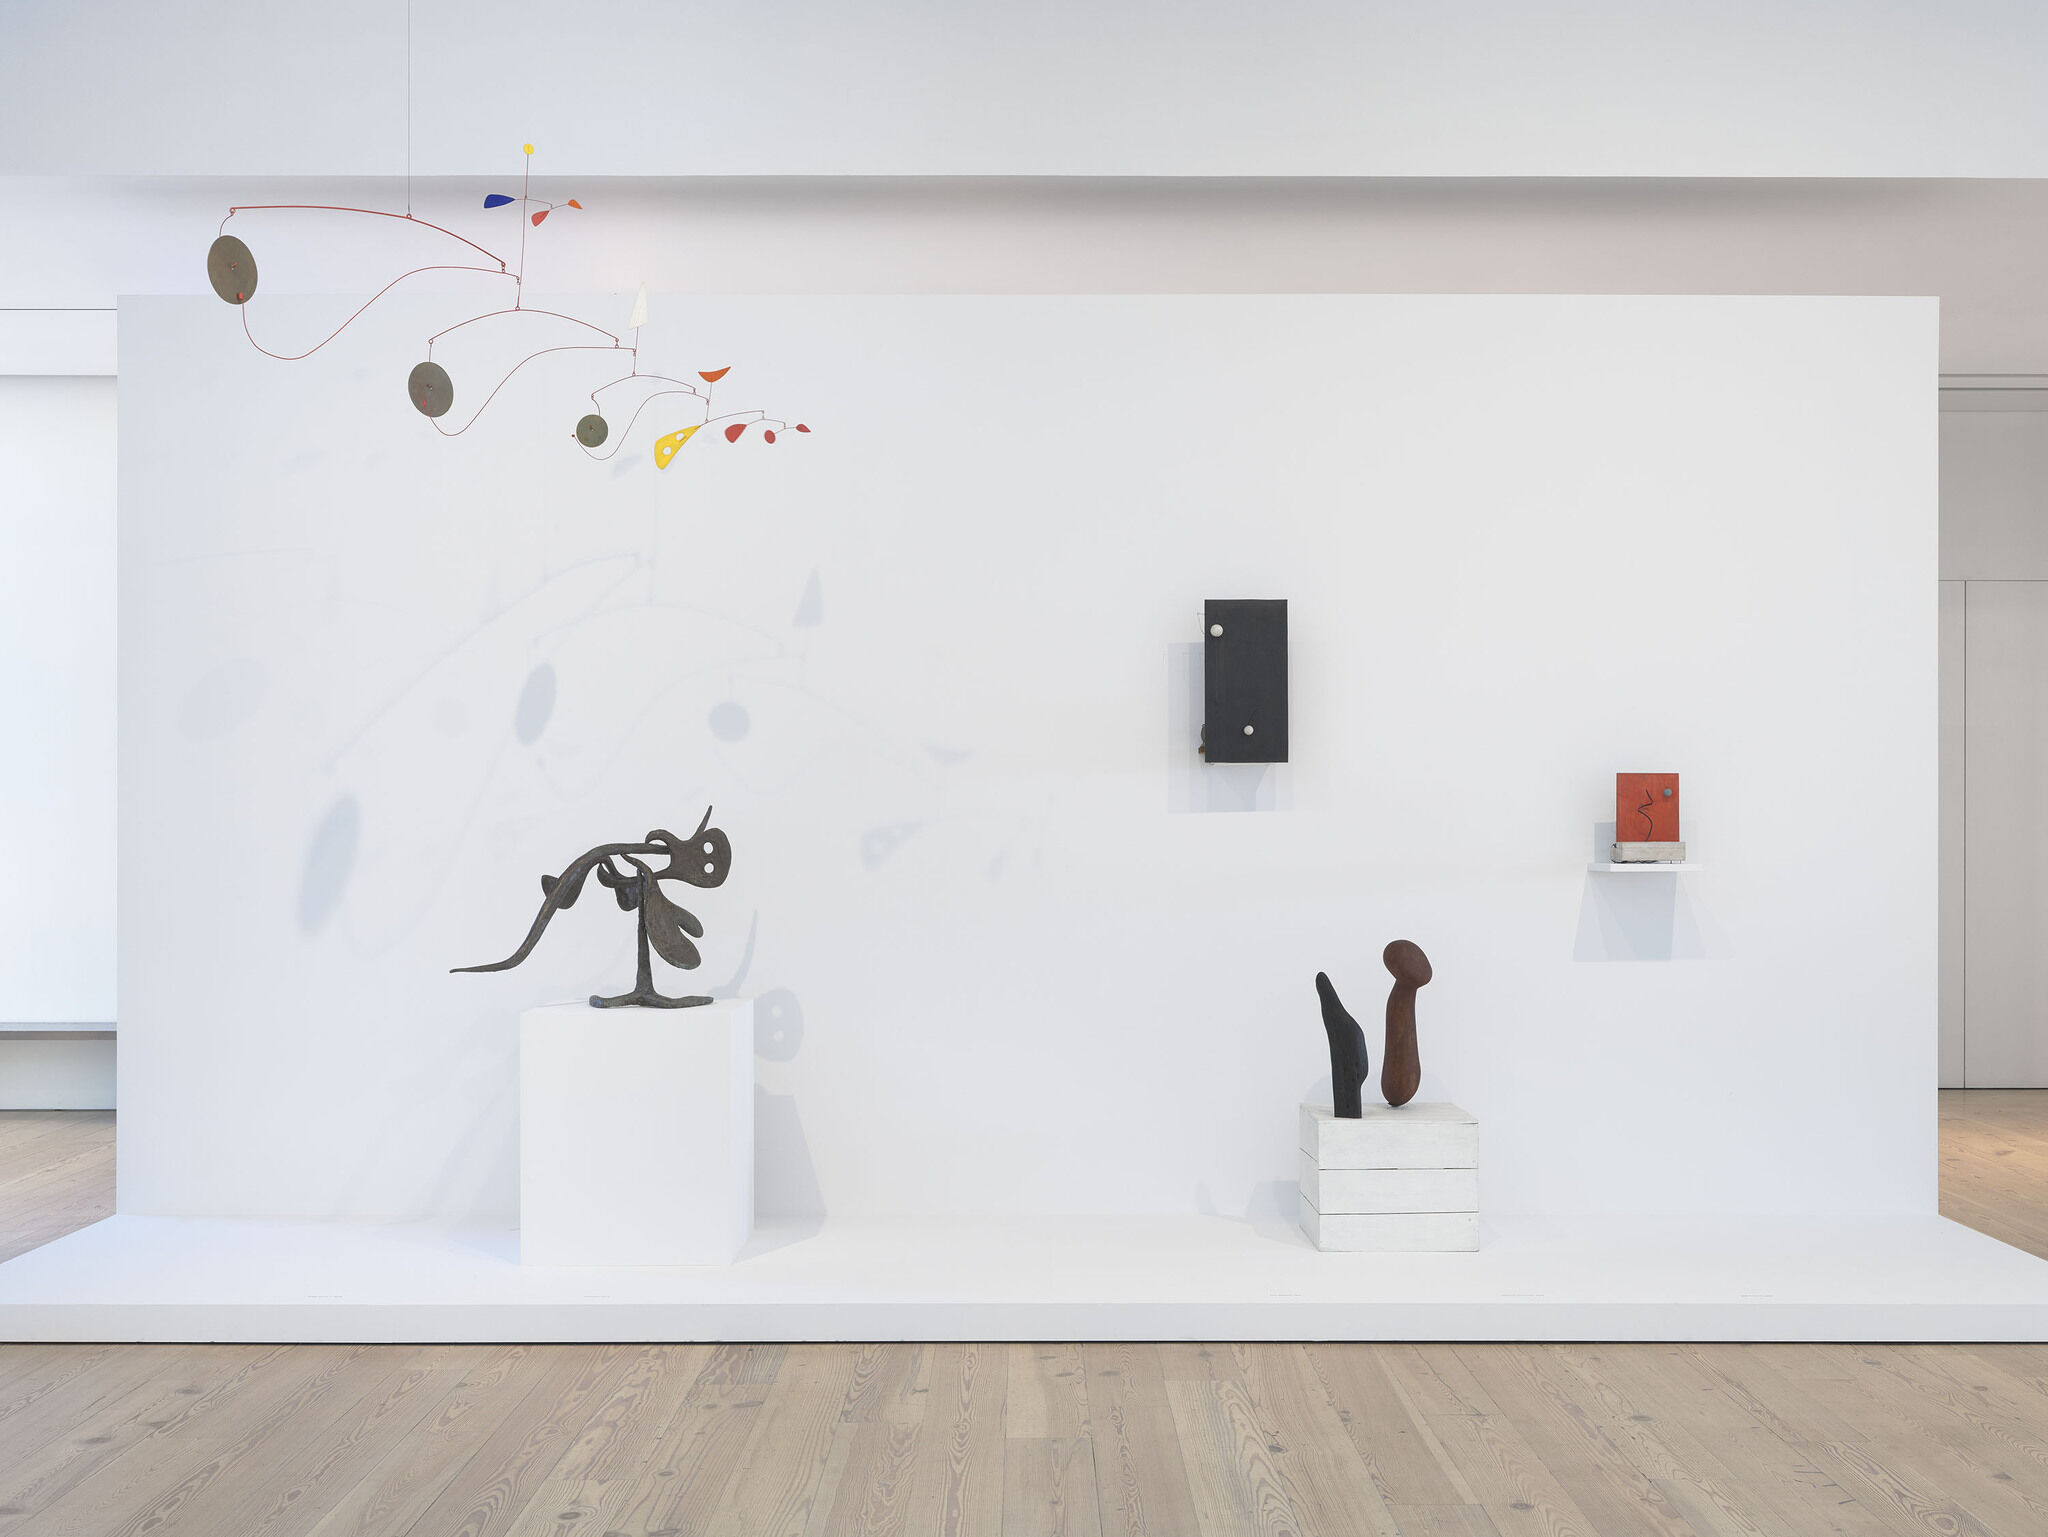 Gallery view of Calder: Hypermobility 